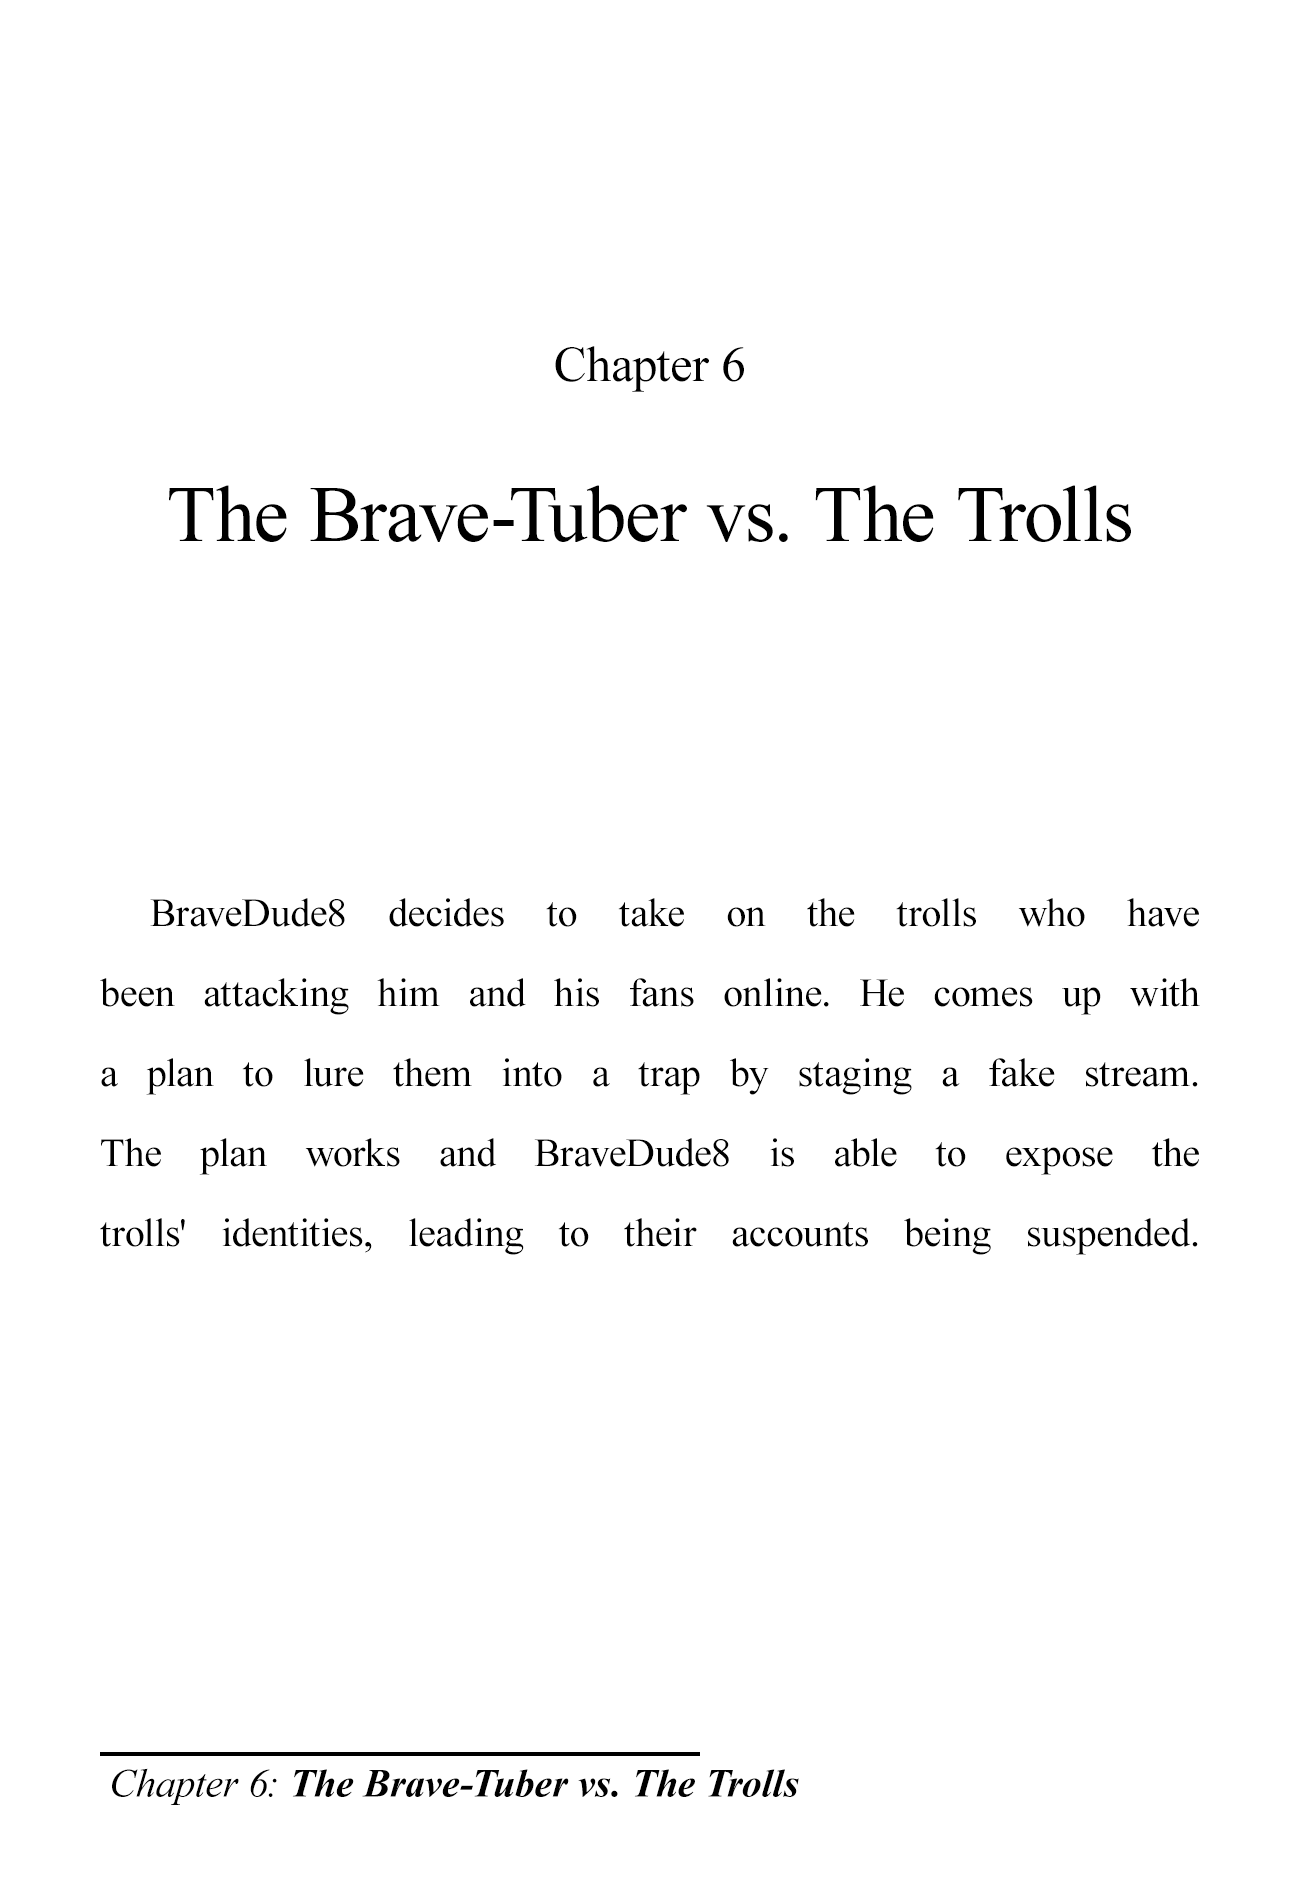 The Brave-Tuber Vol.1 Chapter 6: The Brave-Tuber Vs. The Trolls - Picture 1